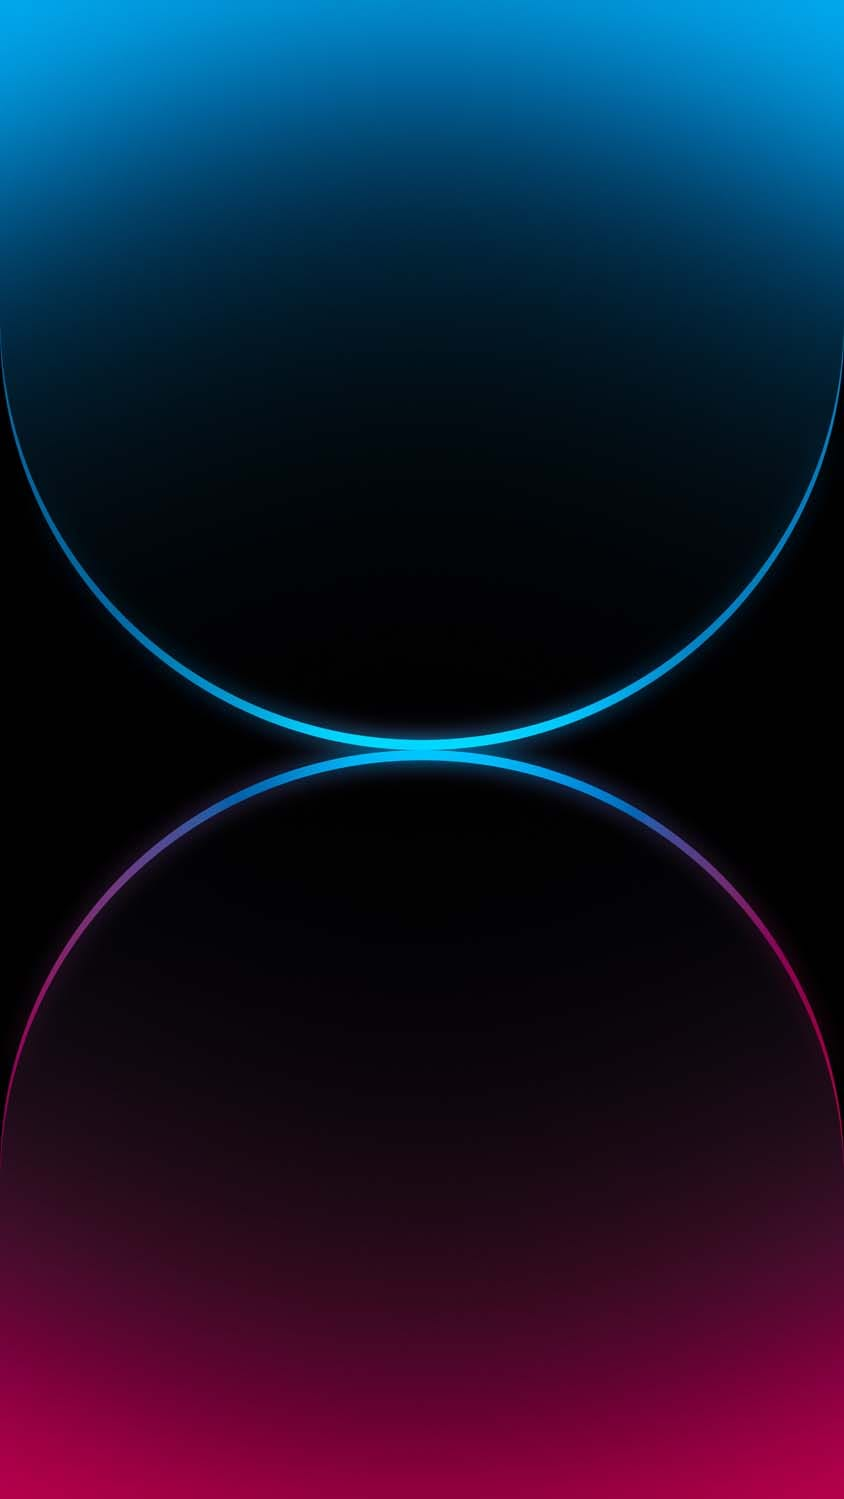 iPhone Pro Max Dual Gradient Blue And Red Wallpaper